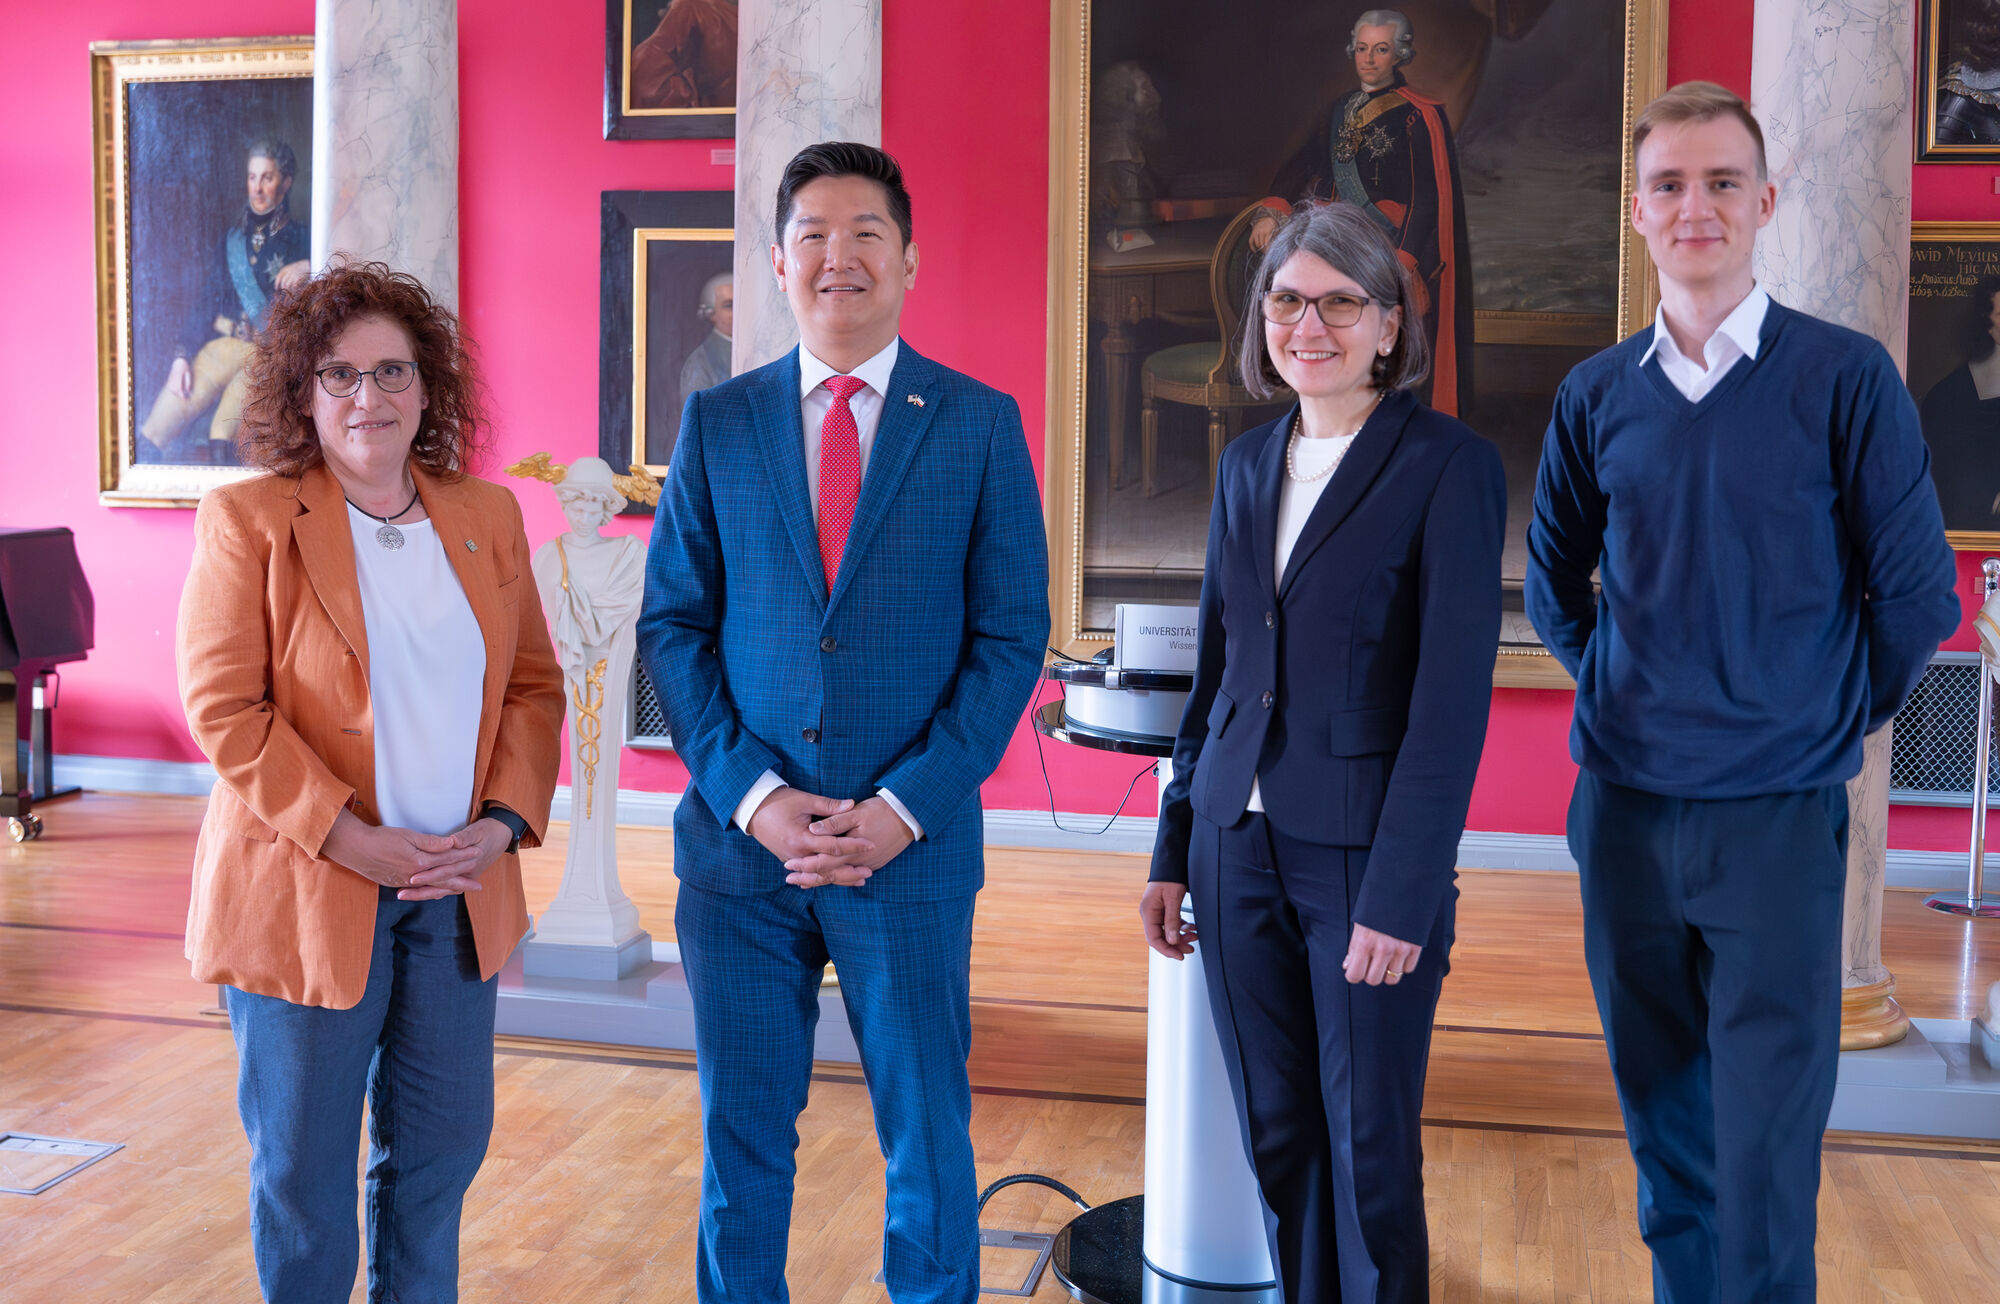 Jason Chue (second from left) was welcomed in the University of Greifswald’s historic Aula